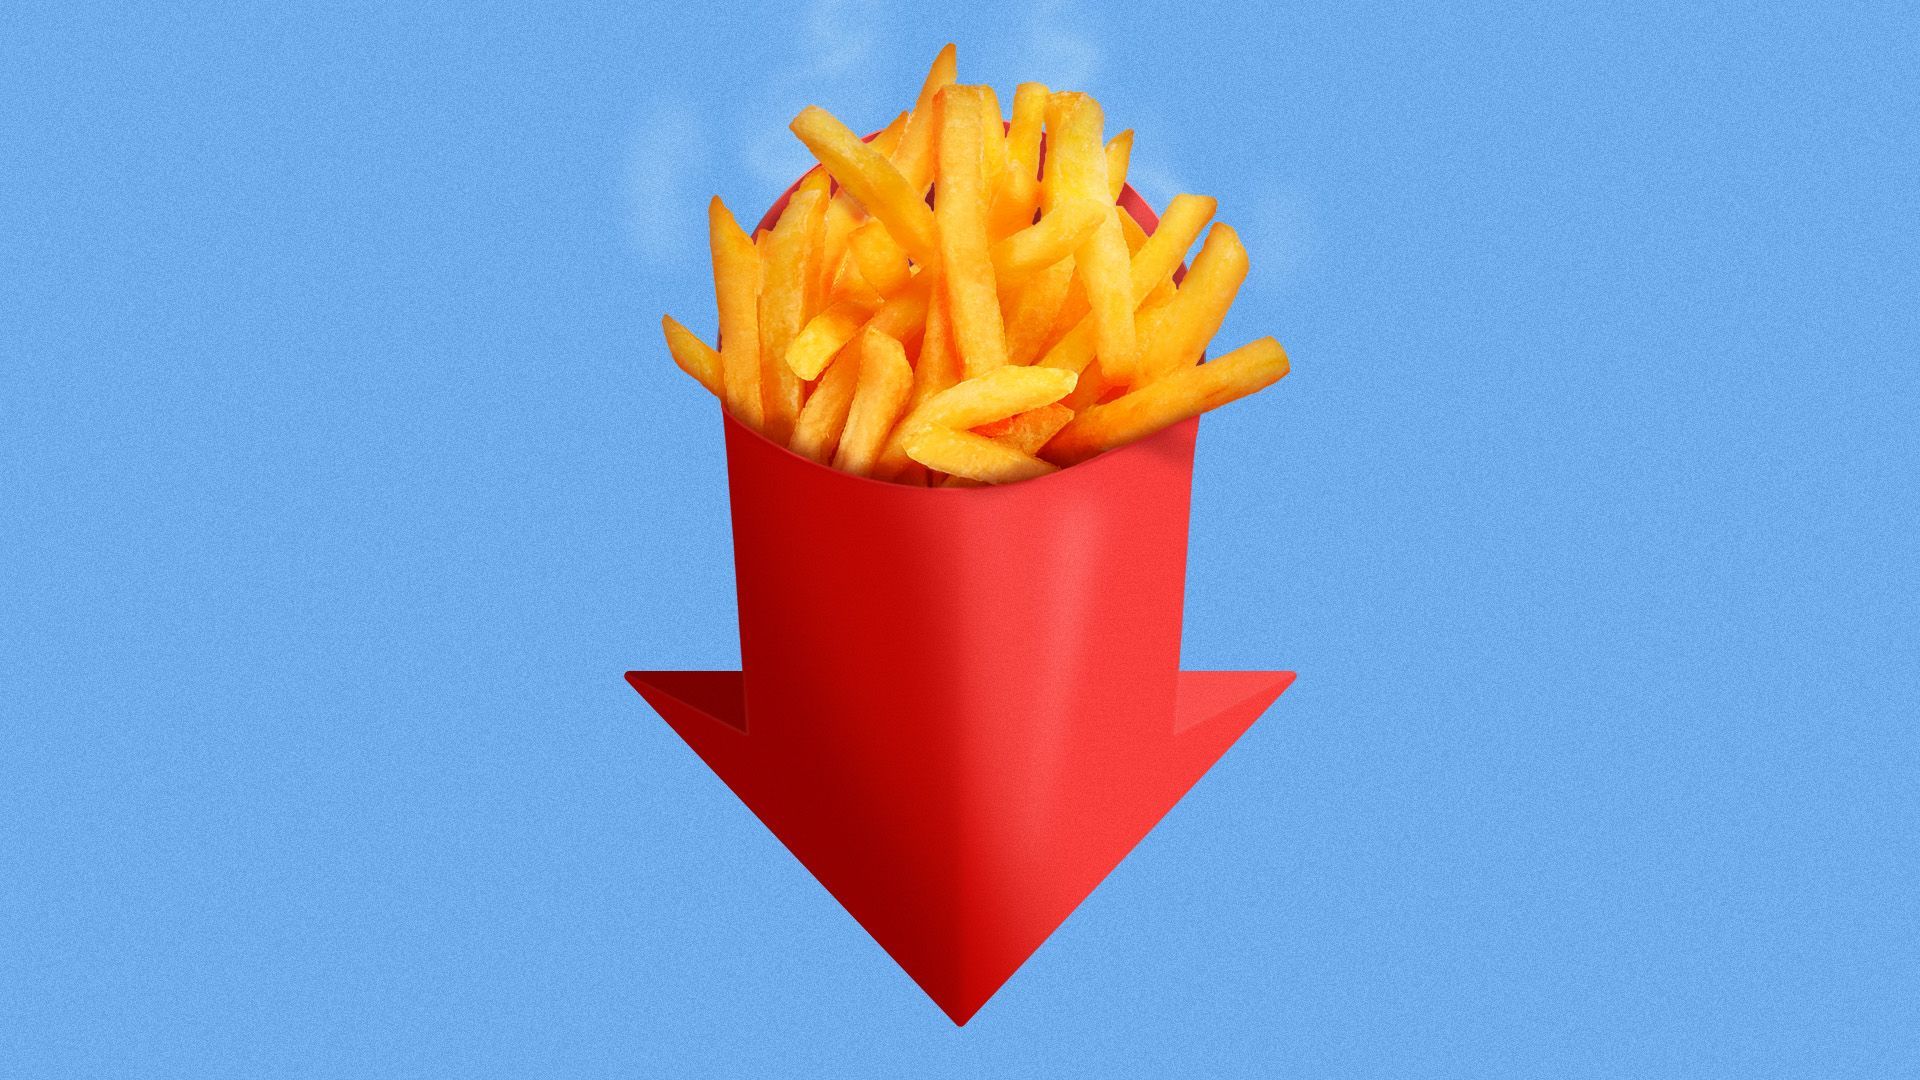 Illustration of french fries in a downward arrow shaped fast food container